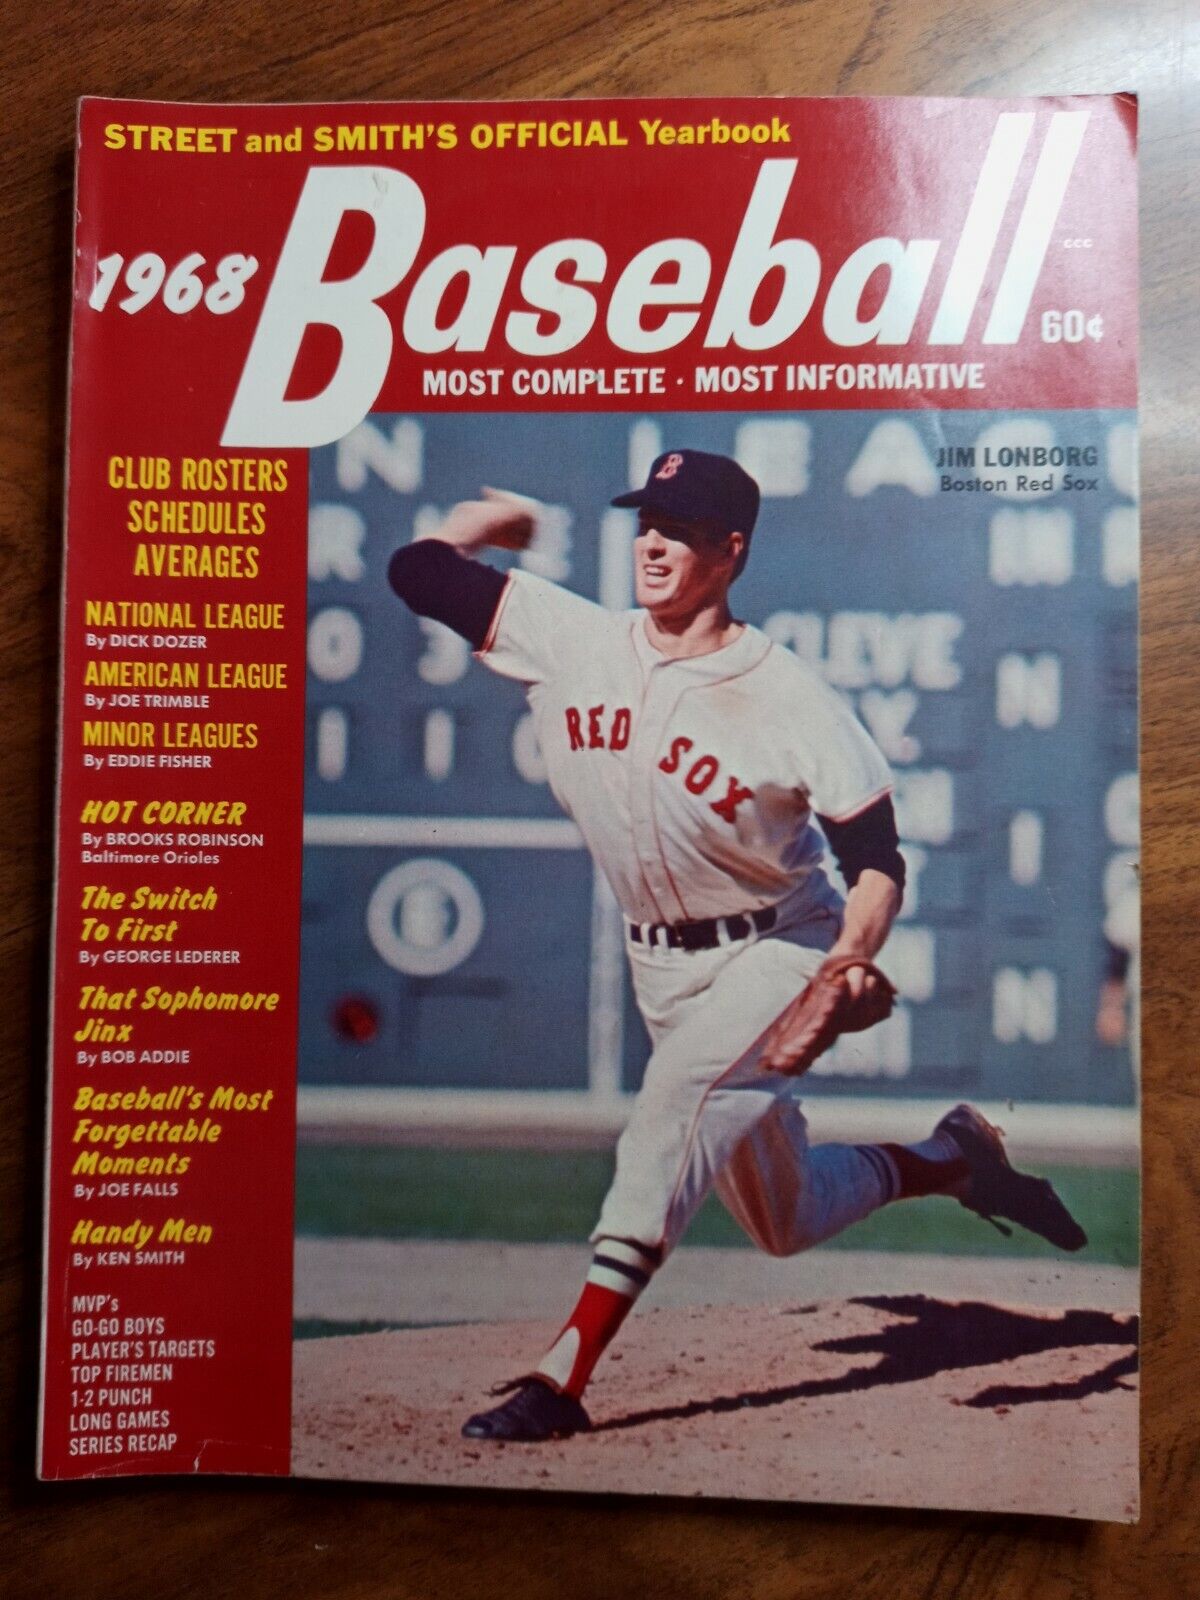 1968 Street and Smith's Official Yearbook BOSTON RED SOX Jim LON